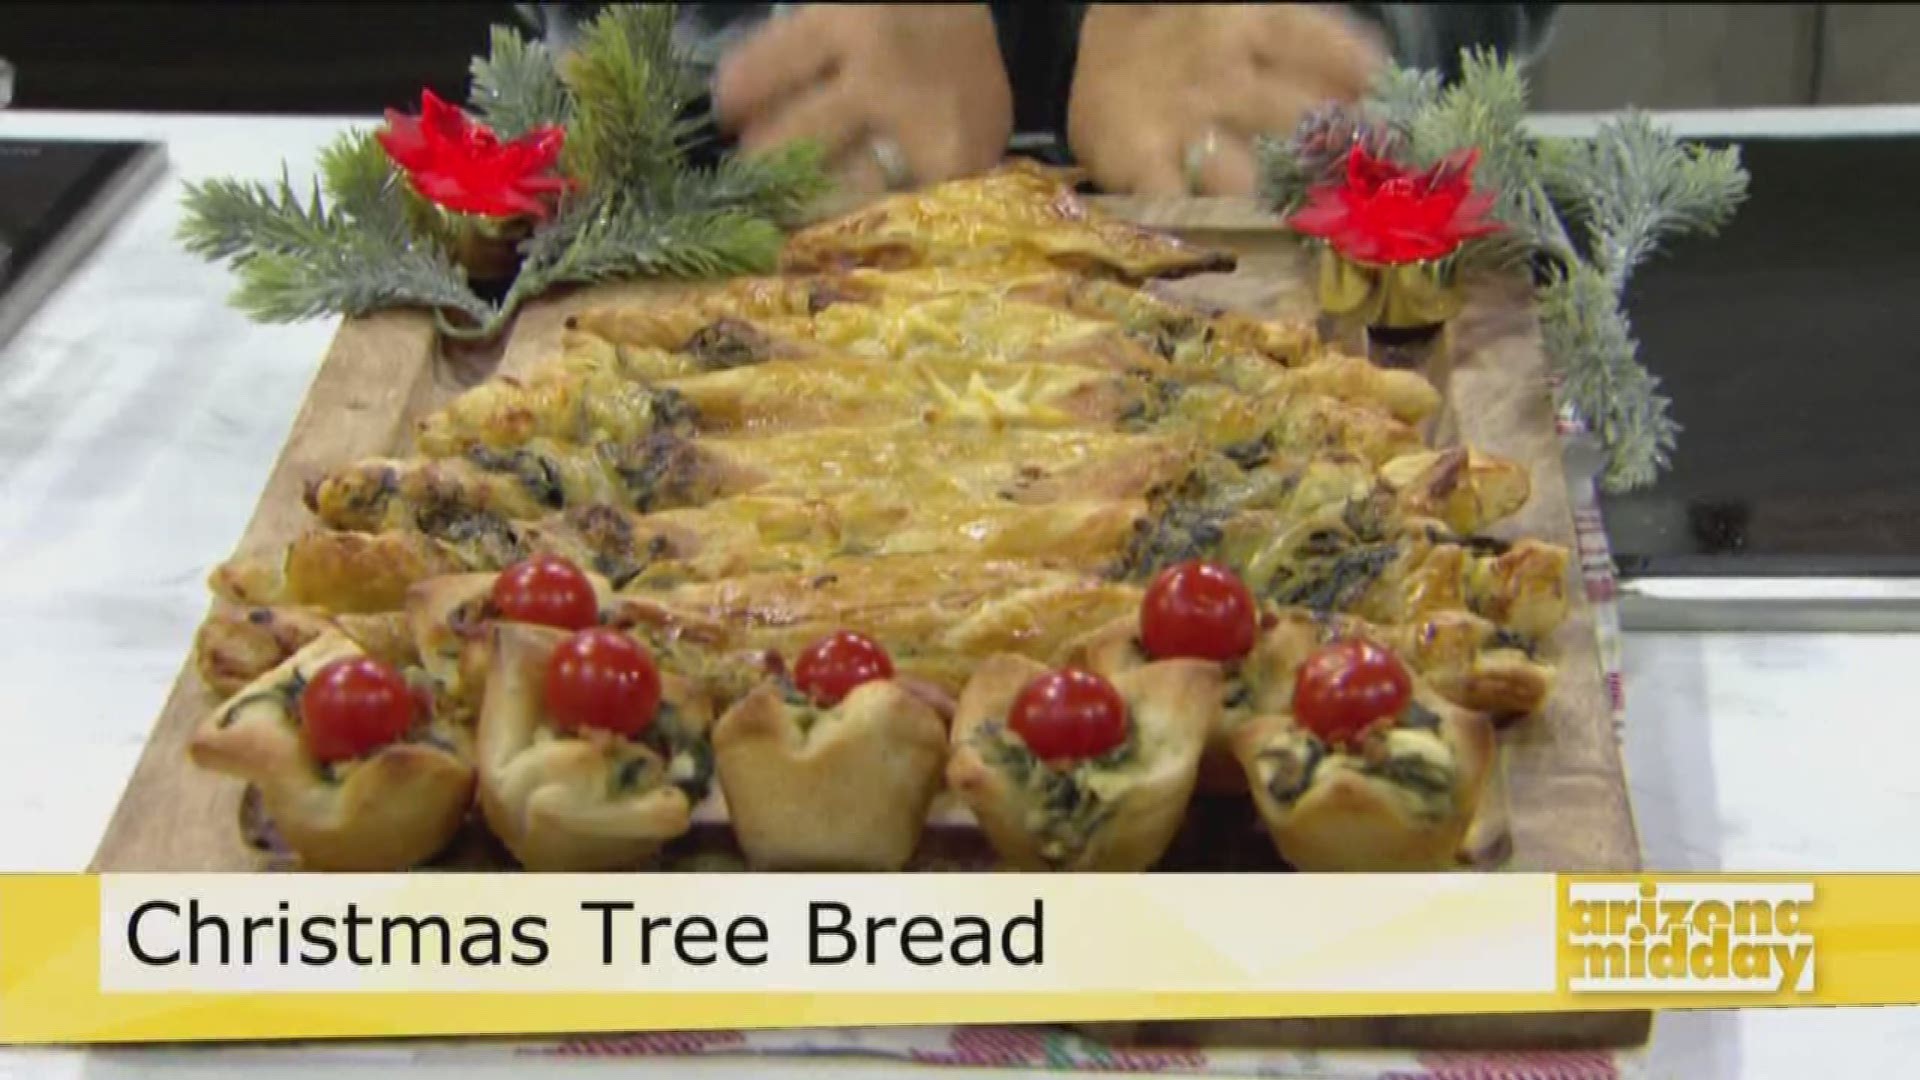 Jan shows us how to create a holiday tree pull apart bread that's perfect for any party.